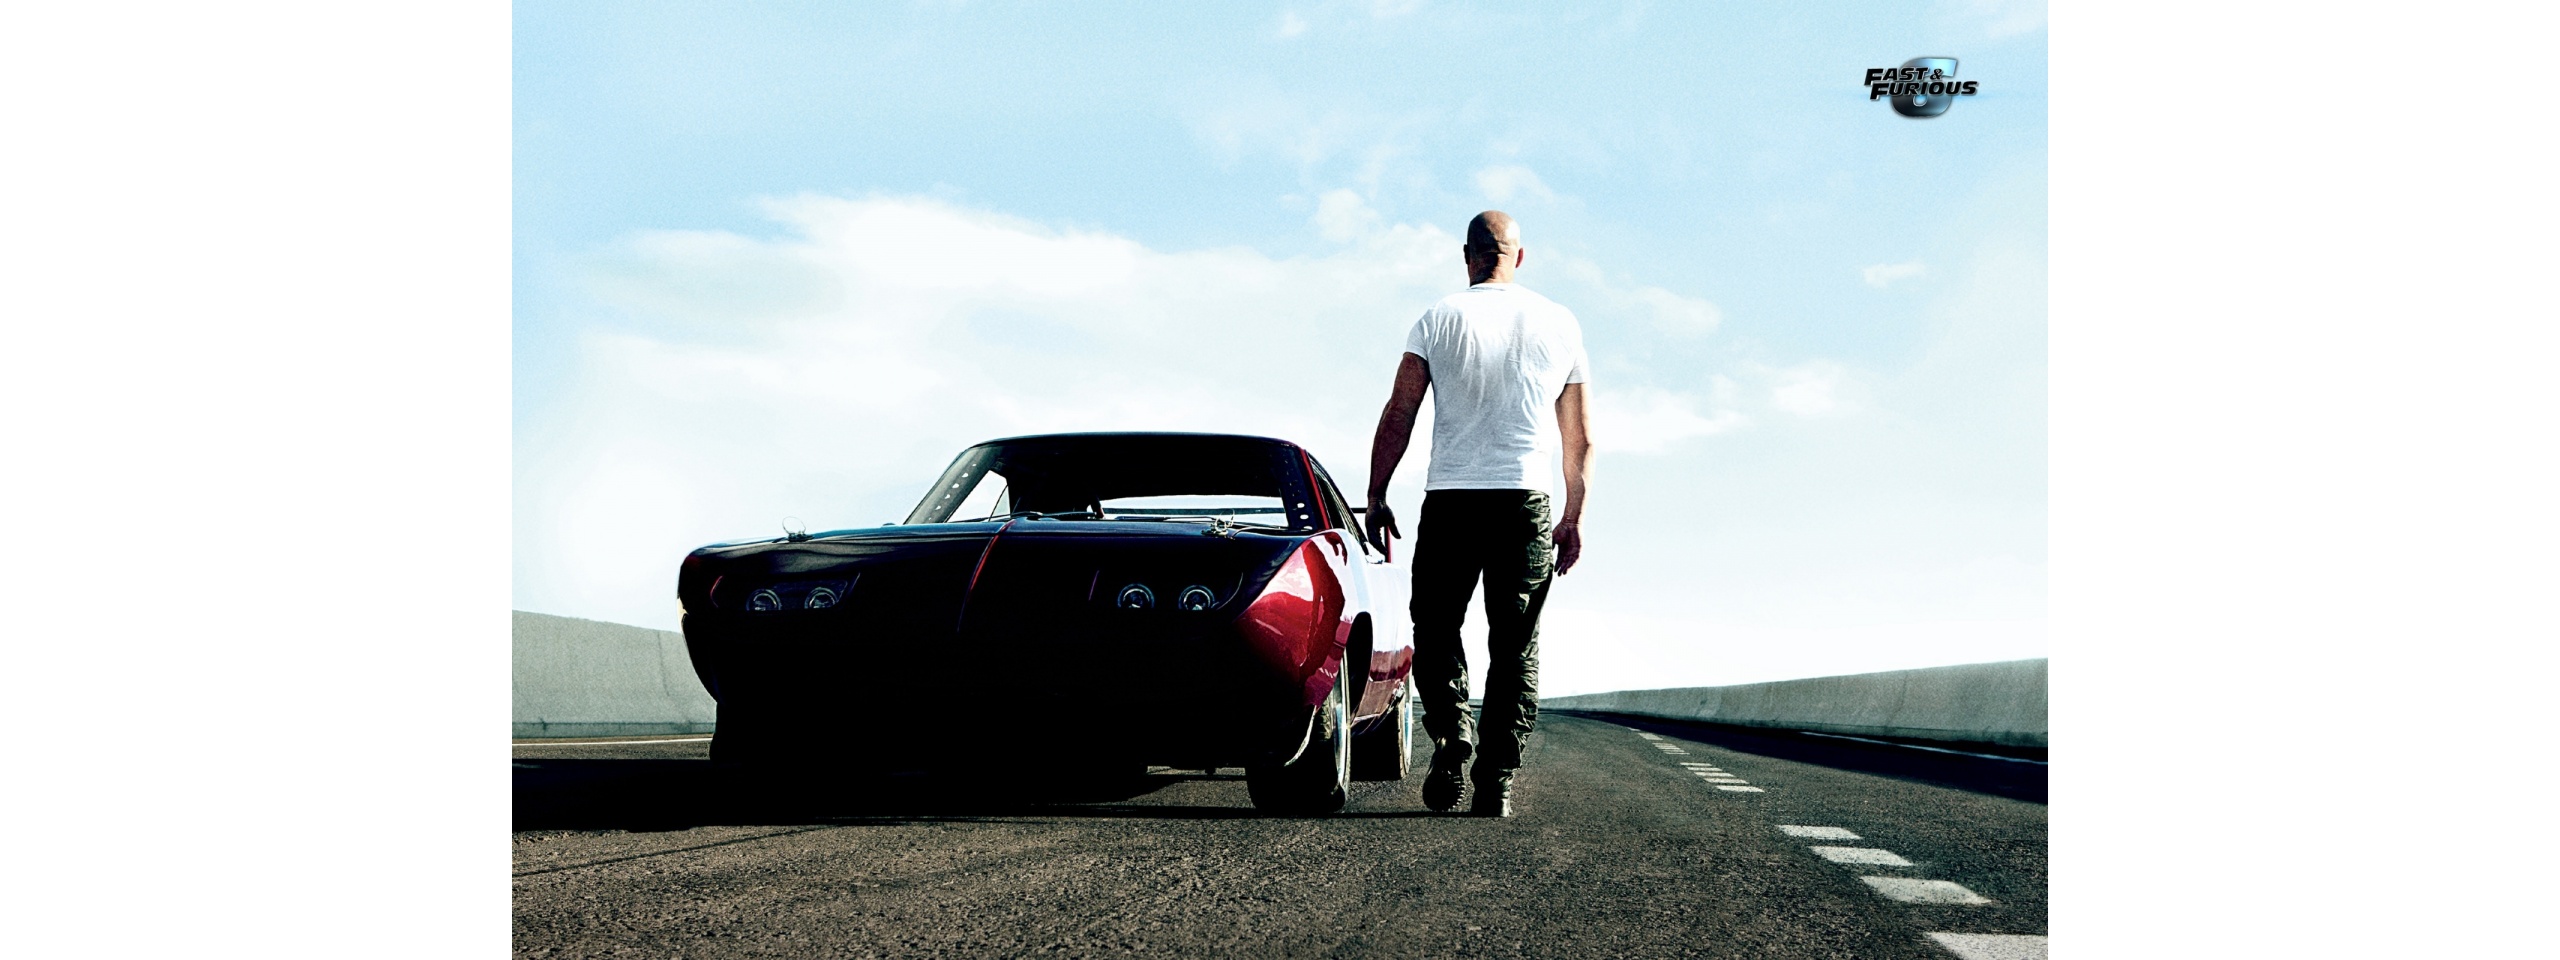 Selected Resoloution Vin Diesel Fast And Furious